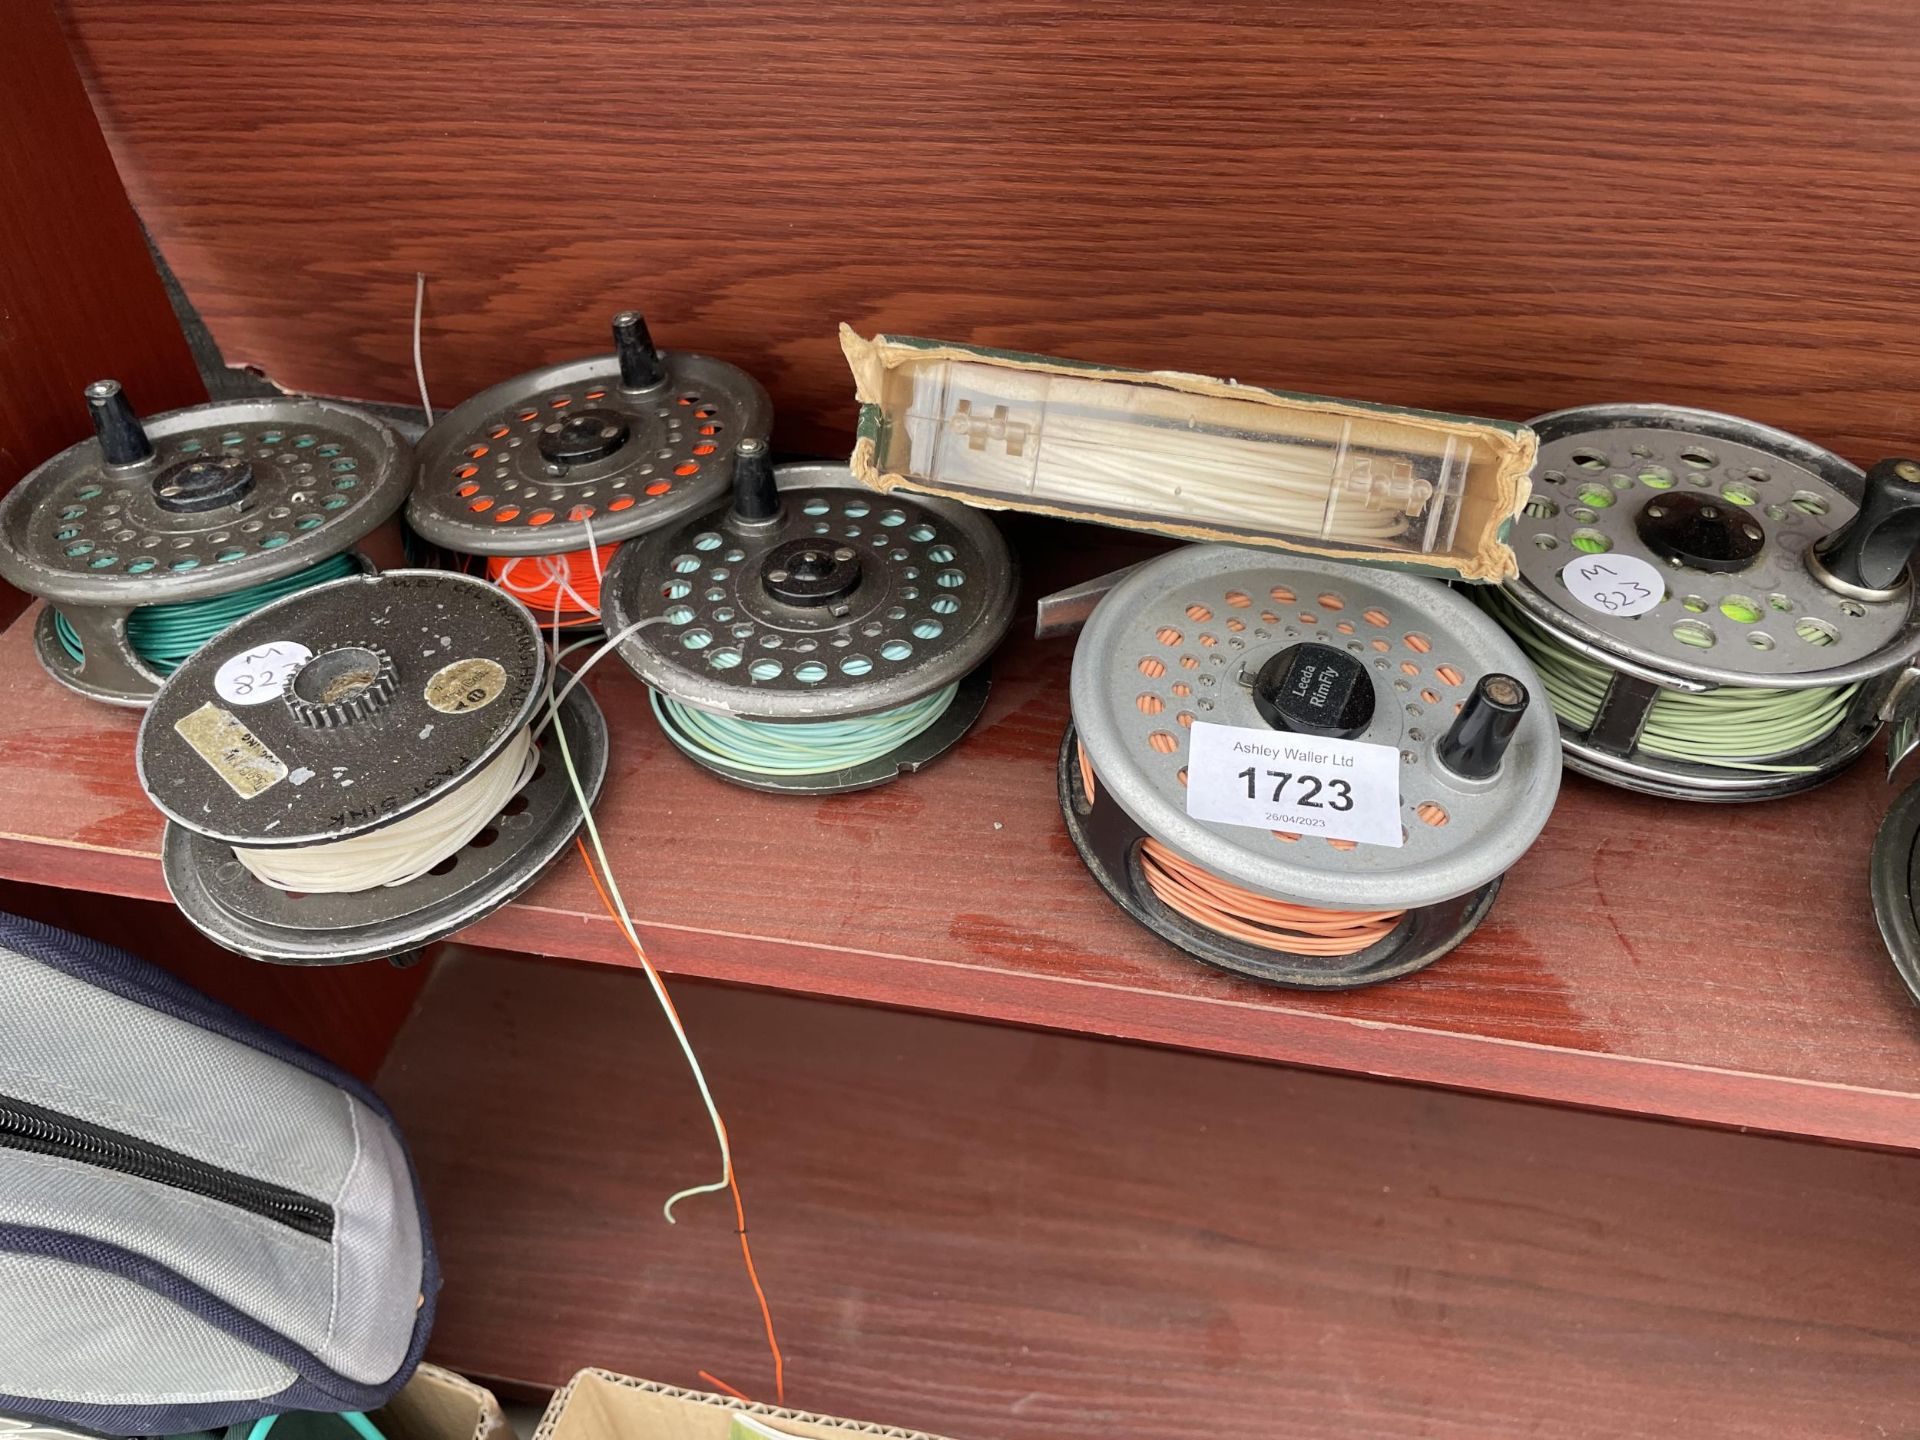 EIGHT VARIOUS FLY FISHING REELS AND A SPOOL OF FLY LINE - Image 3 of 4